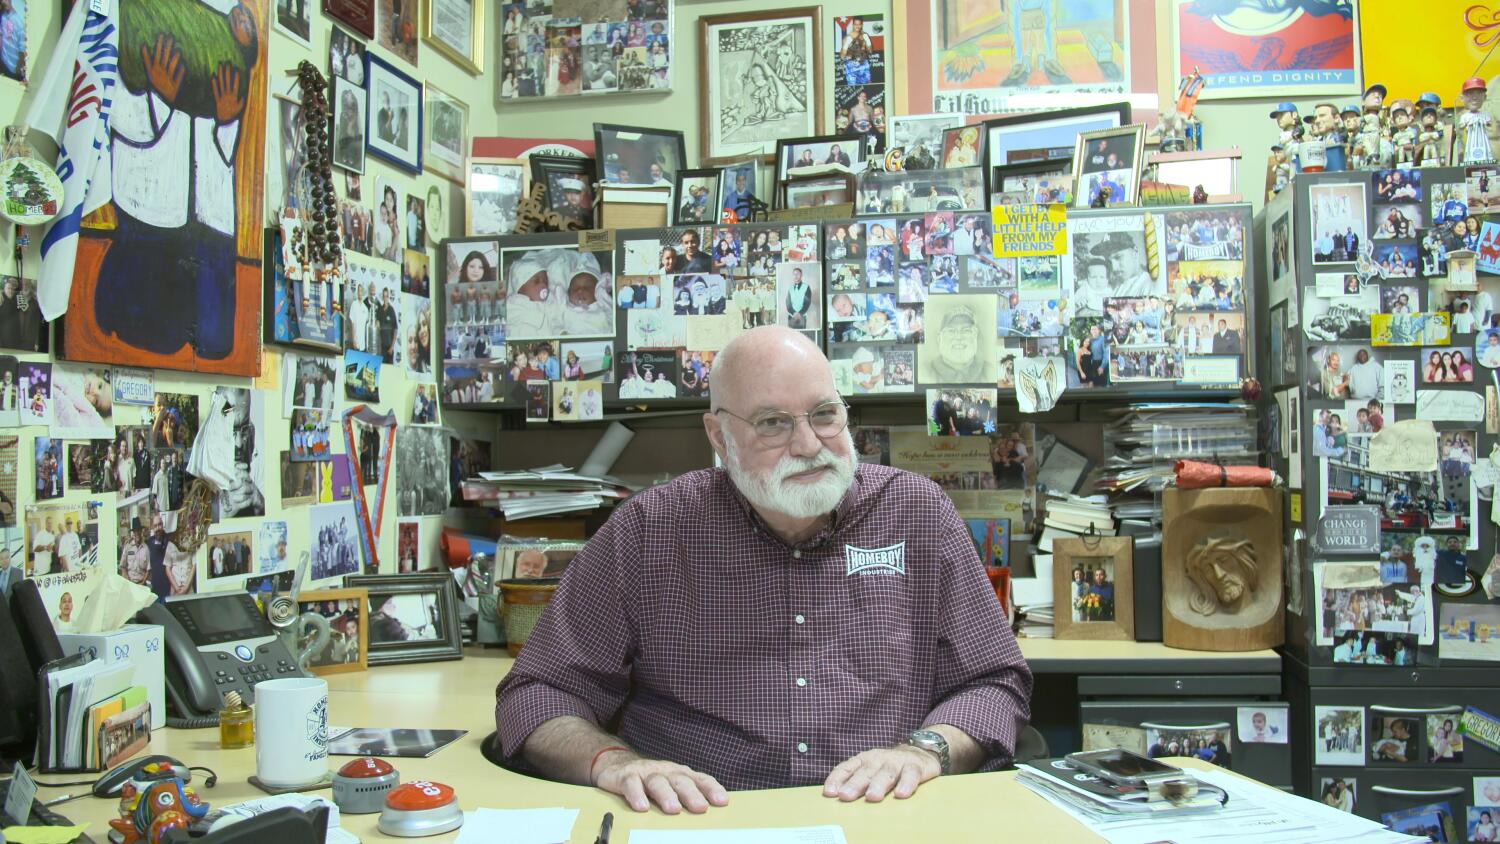 father-greg-boyle-of-homeboy-industries-to-receive-presidential-medal-of-freedom